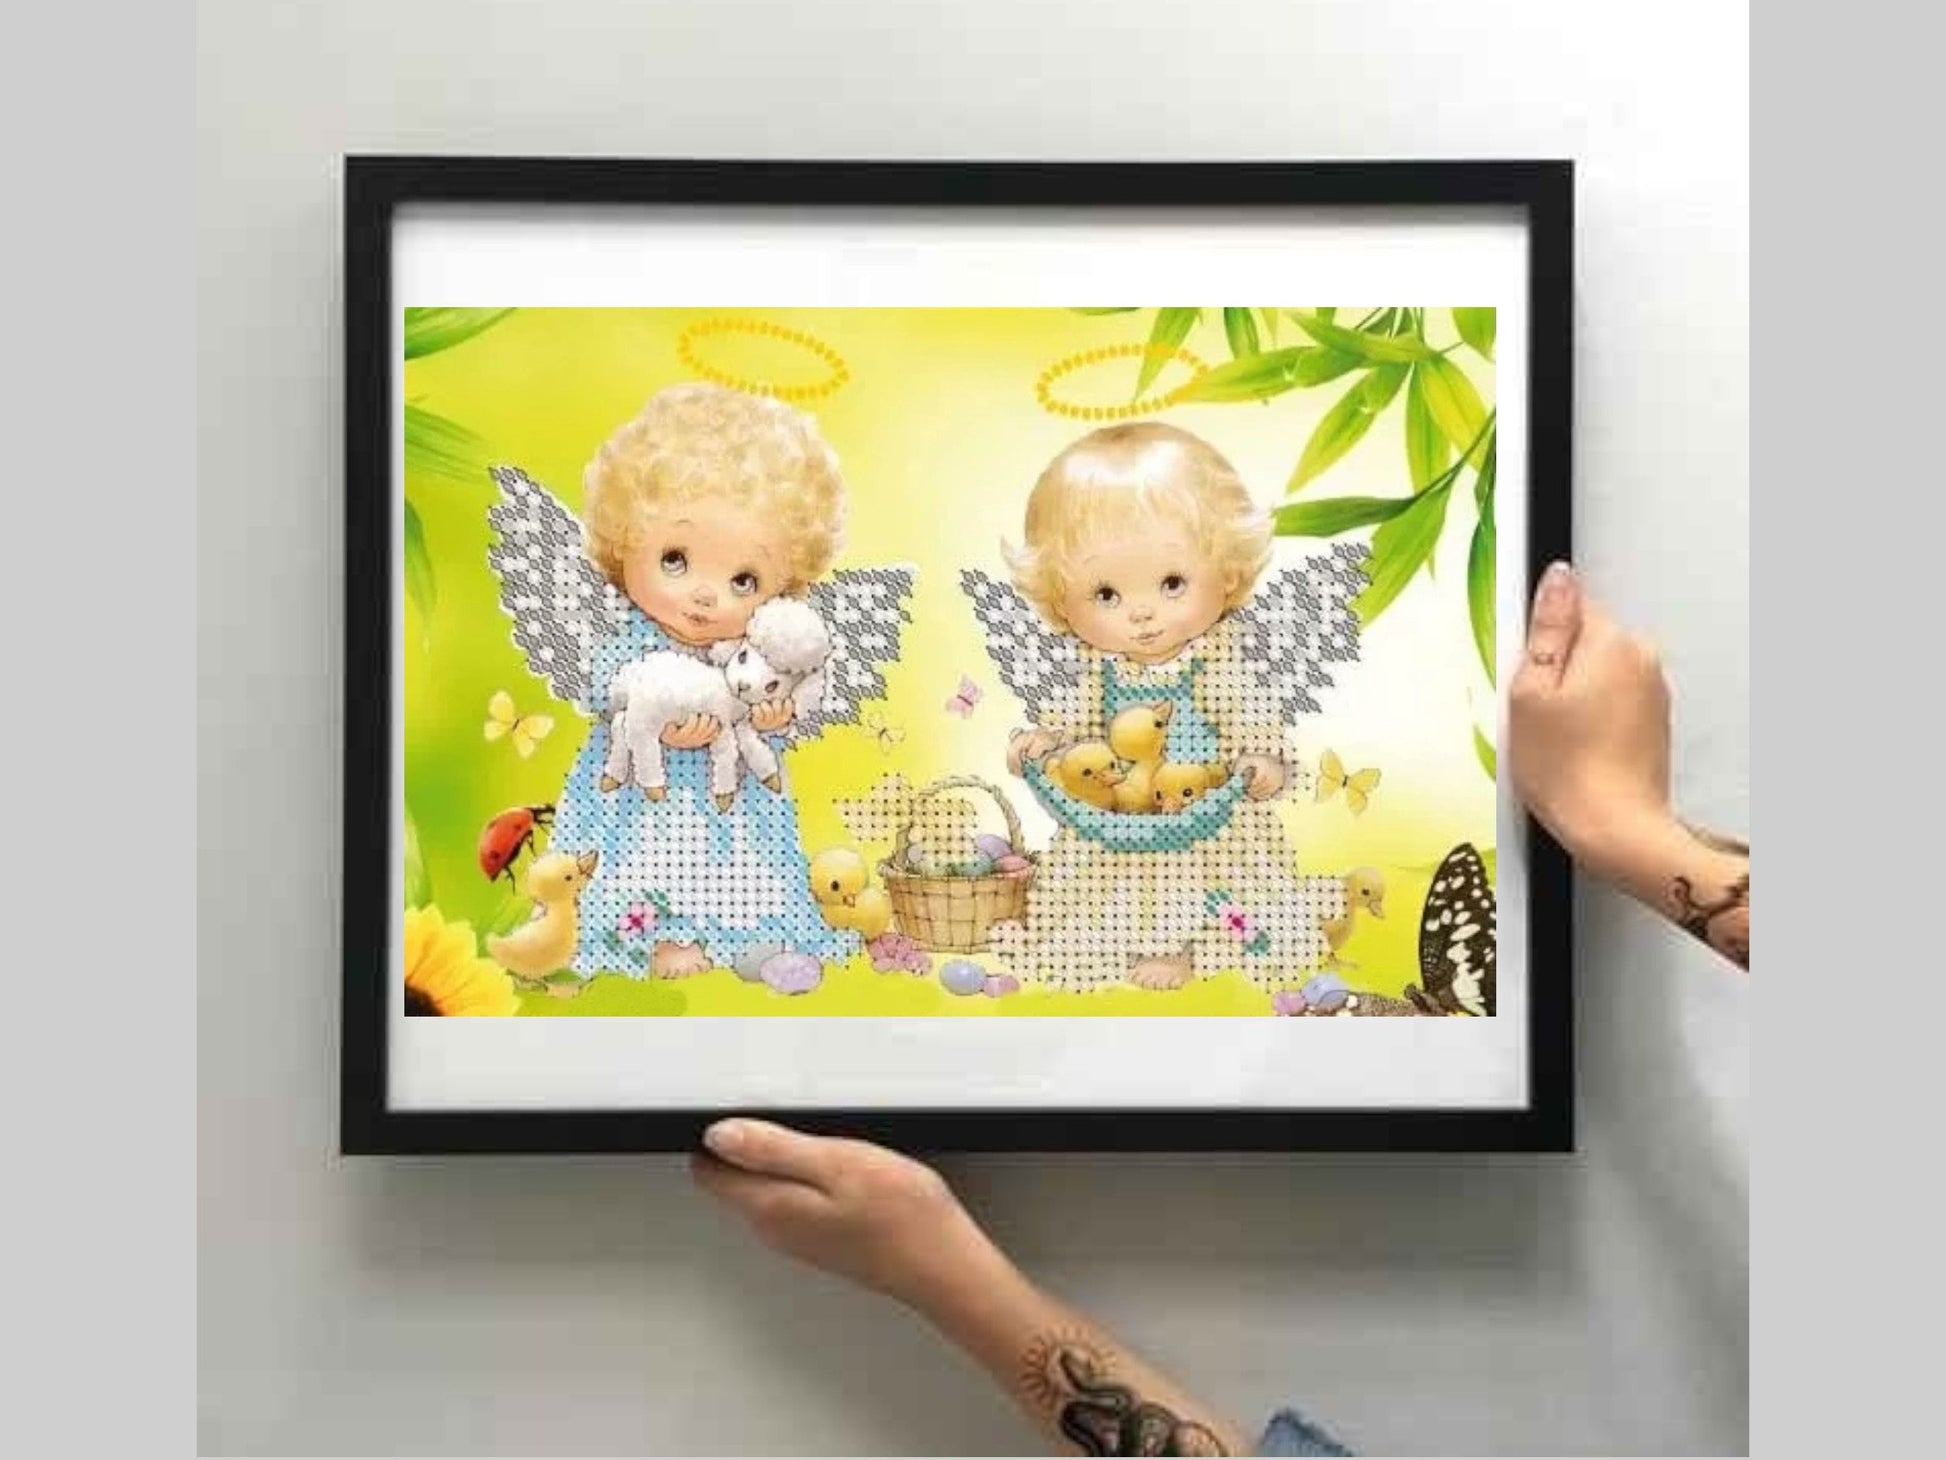 Small Bead embroidery kit "Angels. Easter." Size: 5.5-6.7 in (14-17cm) - VadymShop